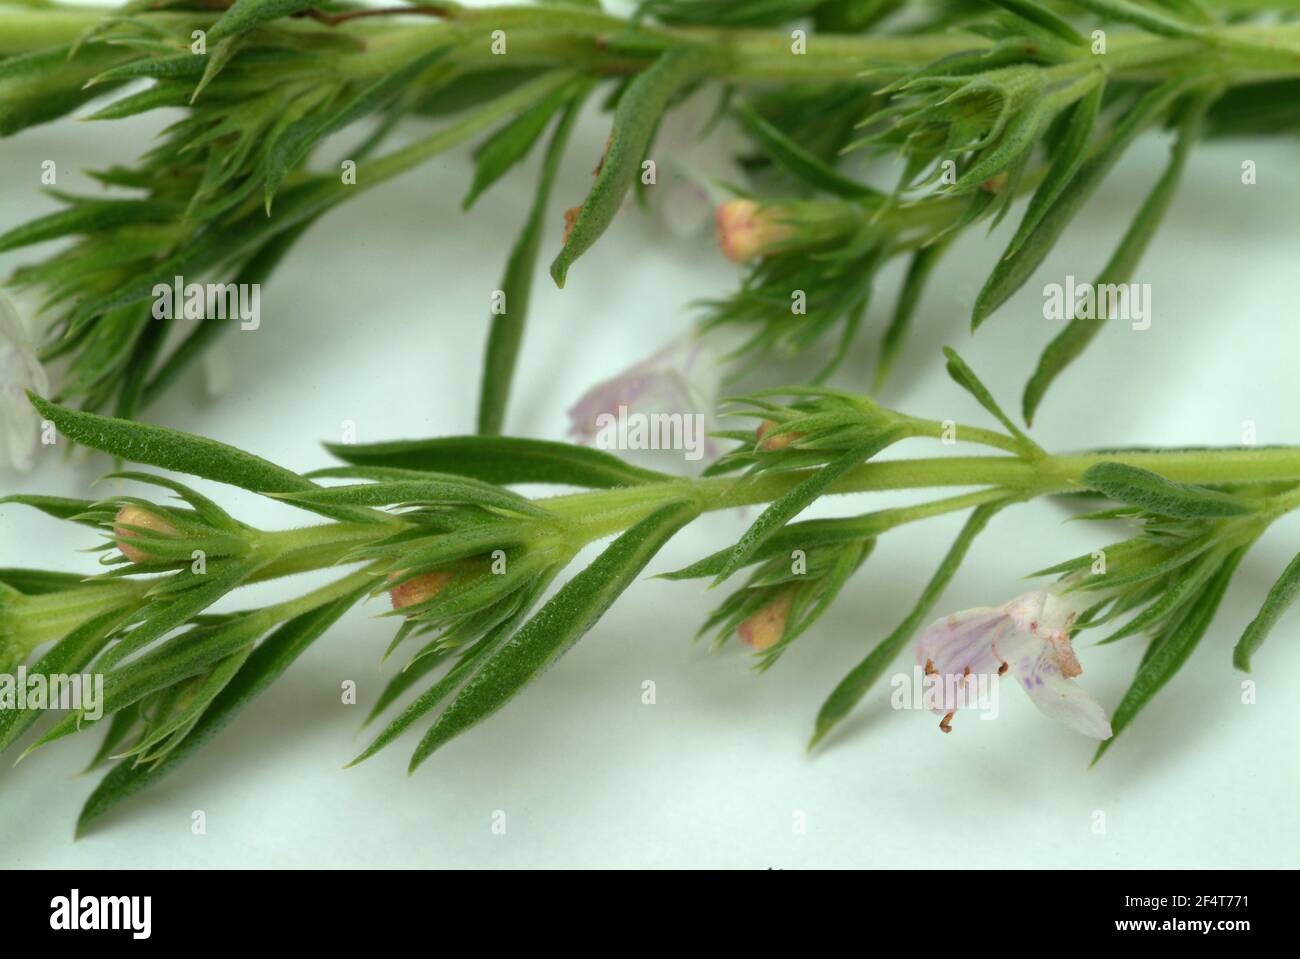 Summer savory, Satureja hortensis, also garden savory, true savory, pepperwort, family of the labiates, used since ancient times as a medicinal and sp Stock Photo